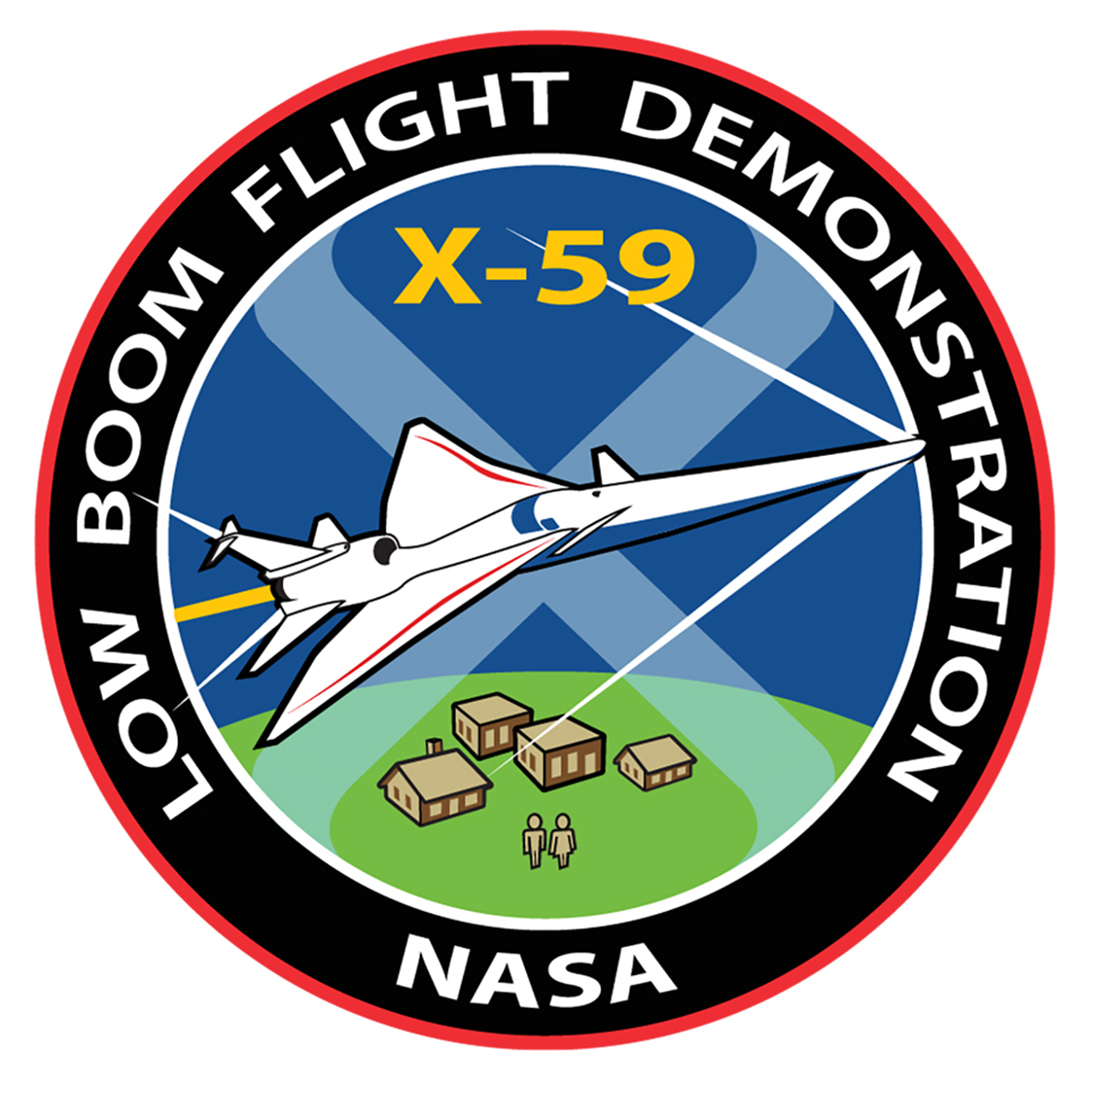 Here, the X-59 designation has been added to NASA's emblem for the Low-Boom Flight Demonstration mission, which aims to build a quiet supersonic airplane.